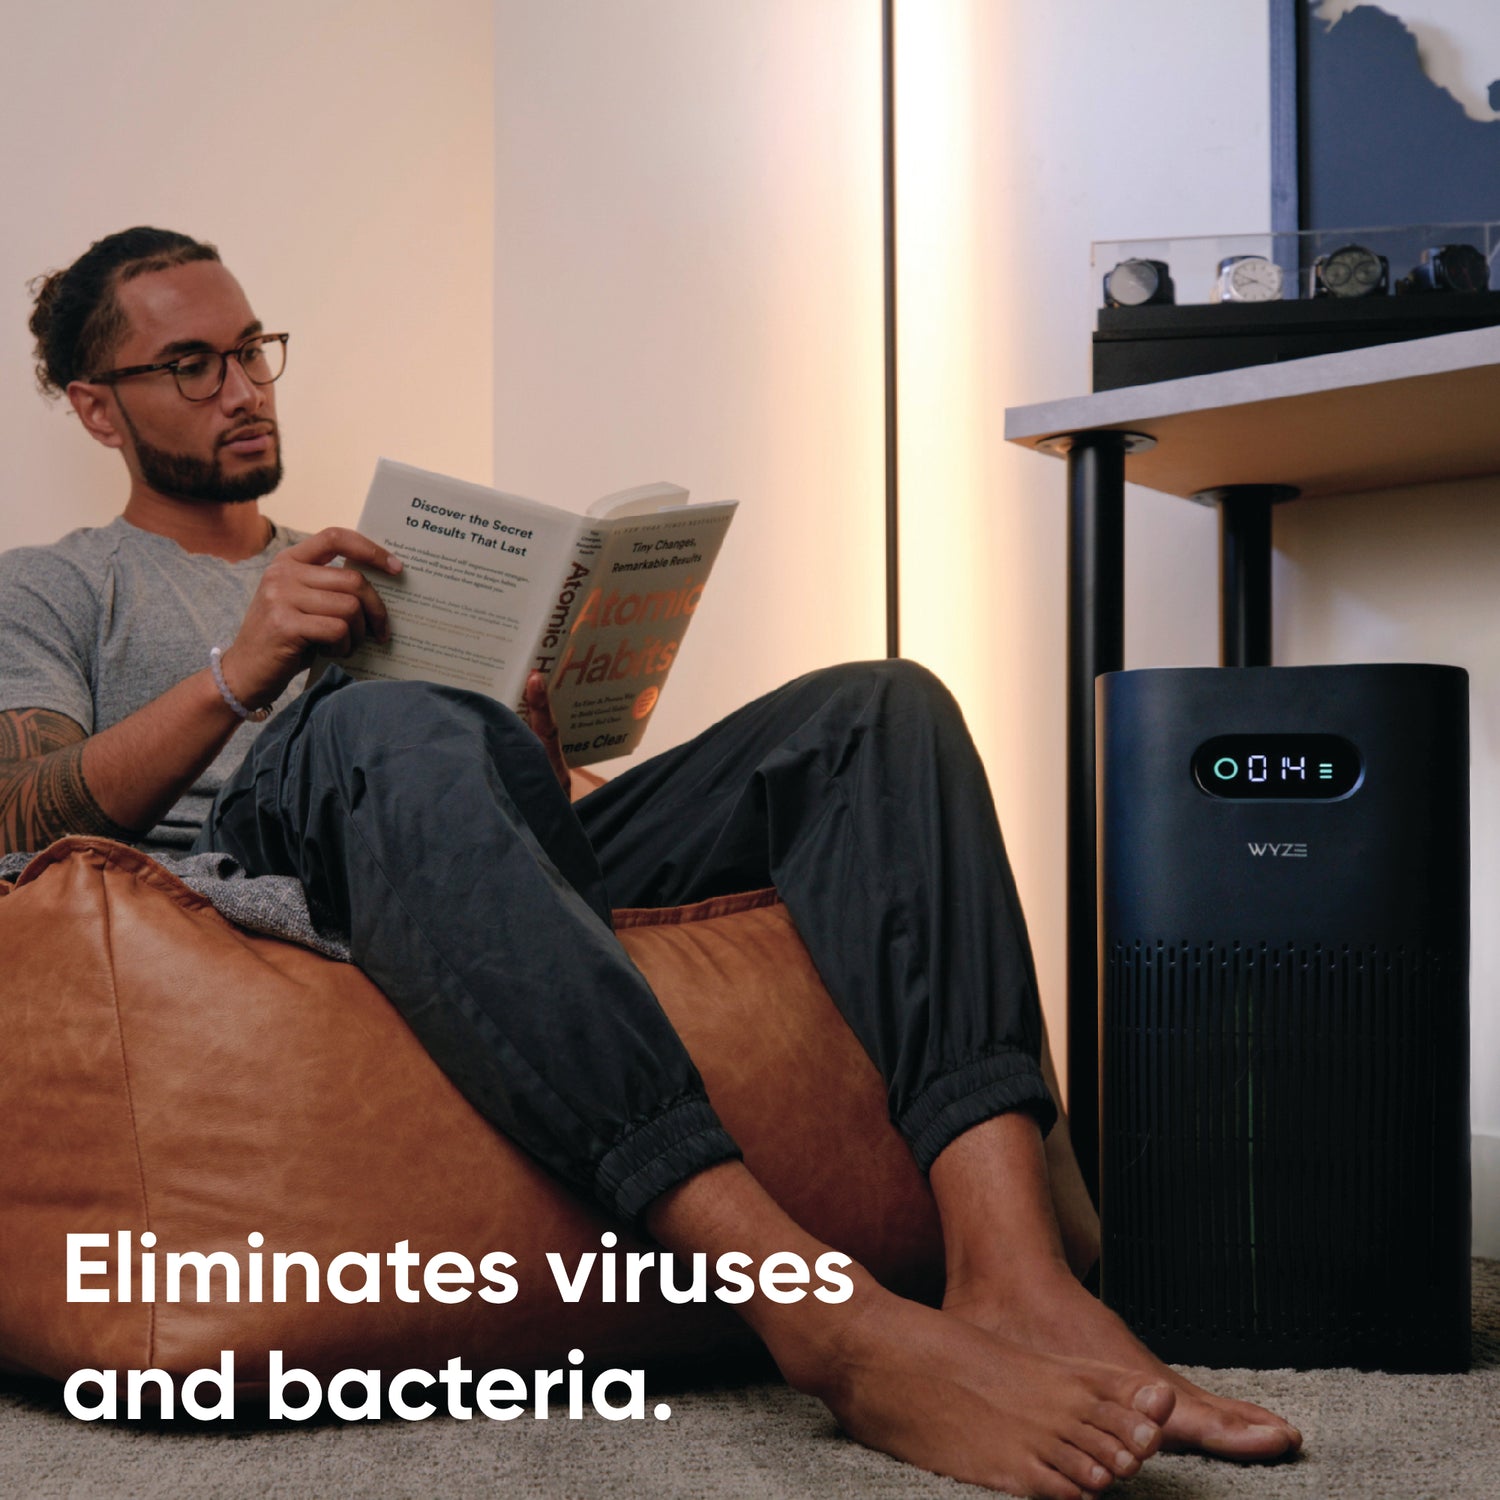 Man reading a book nearby a watch collection and Wyze Air Purifier. White text overlay that says "eliminates viruses and bacteria."